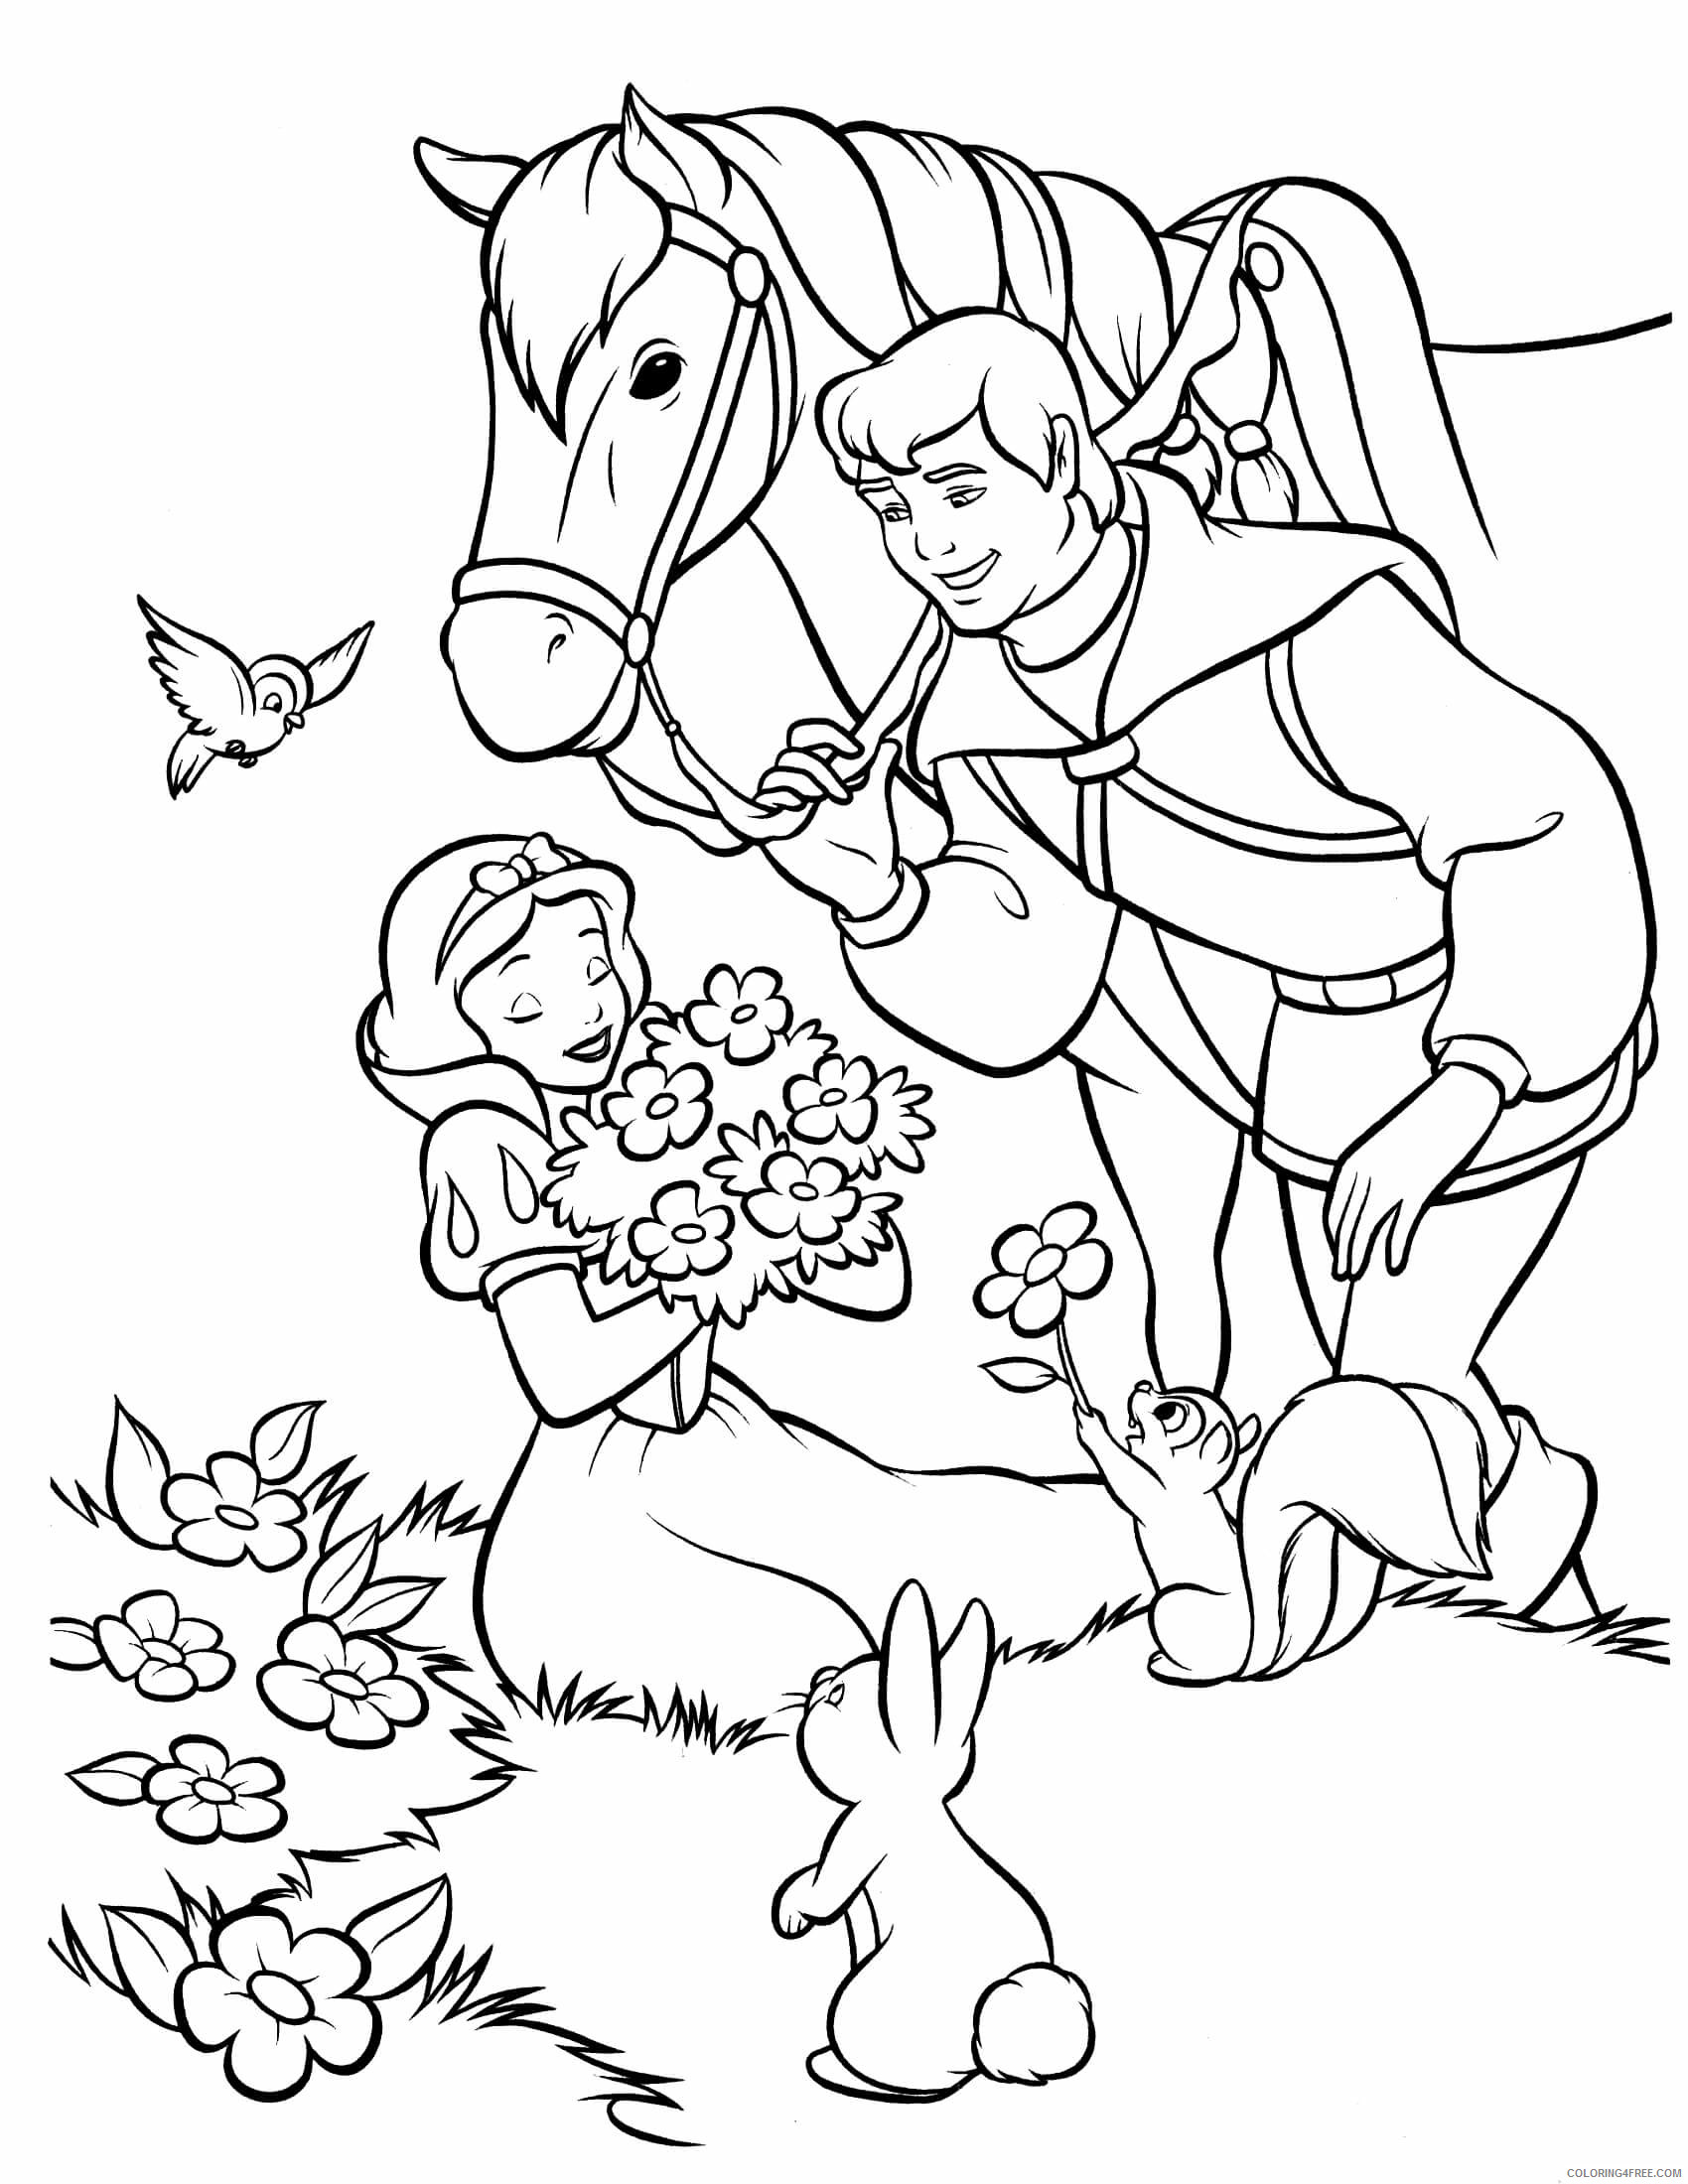 Snow White Coloring Pages Cartoons Free Snow Whites Printable 2020 5714 Coloring4free